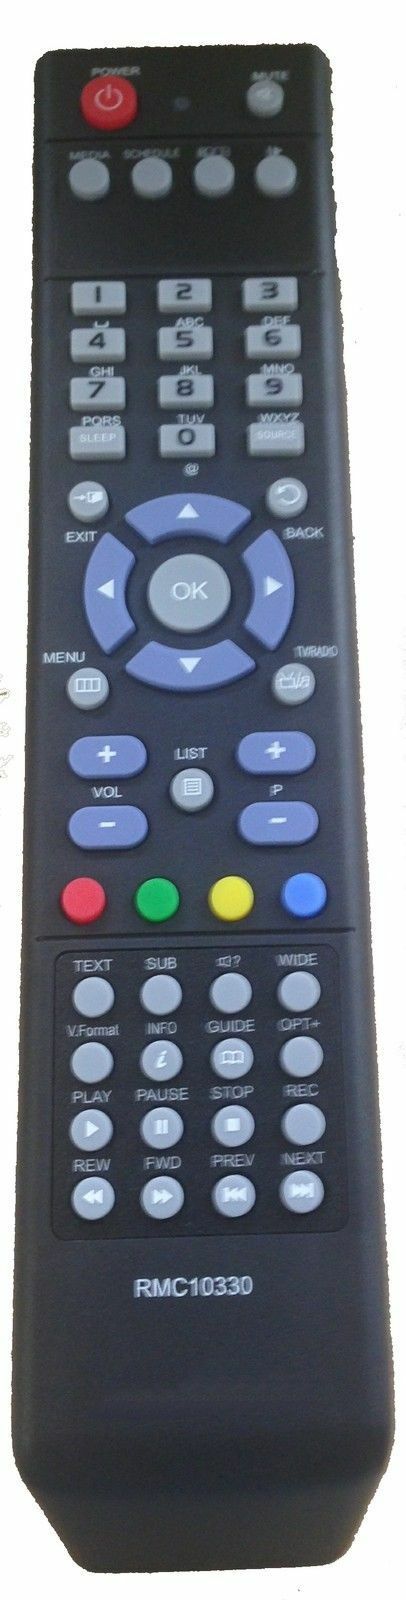 Replacement Remote Control for Hq Sat V1-2013